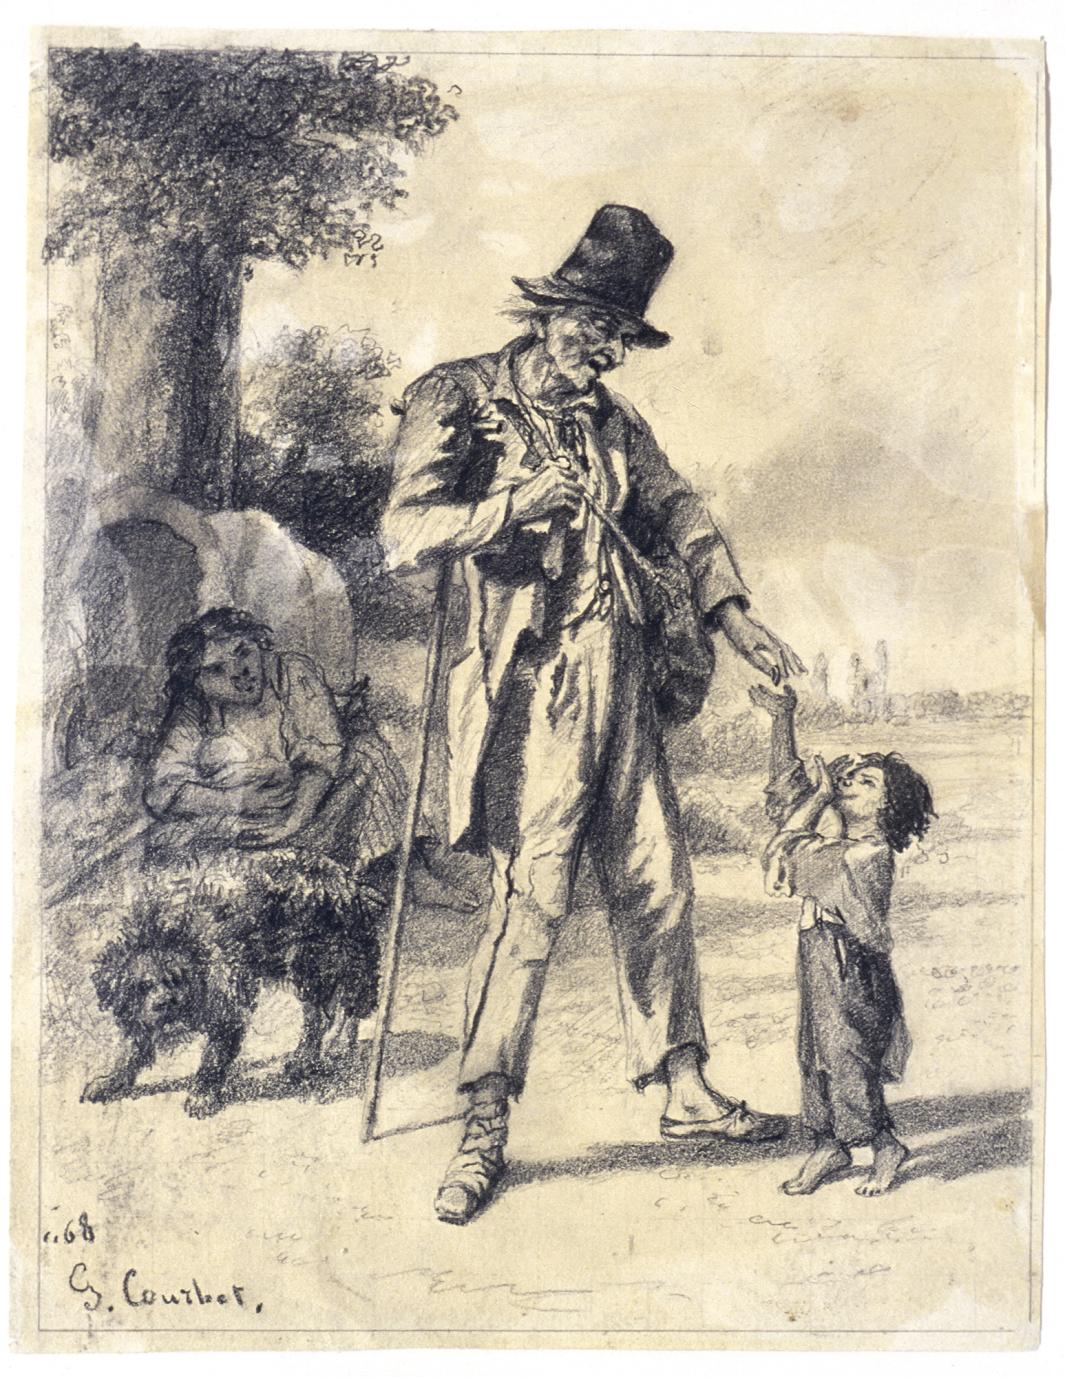 Pencil drawing with man giving a coin to a child